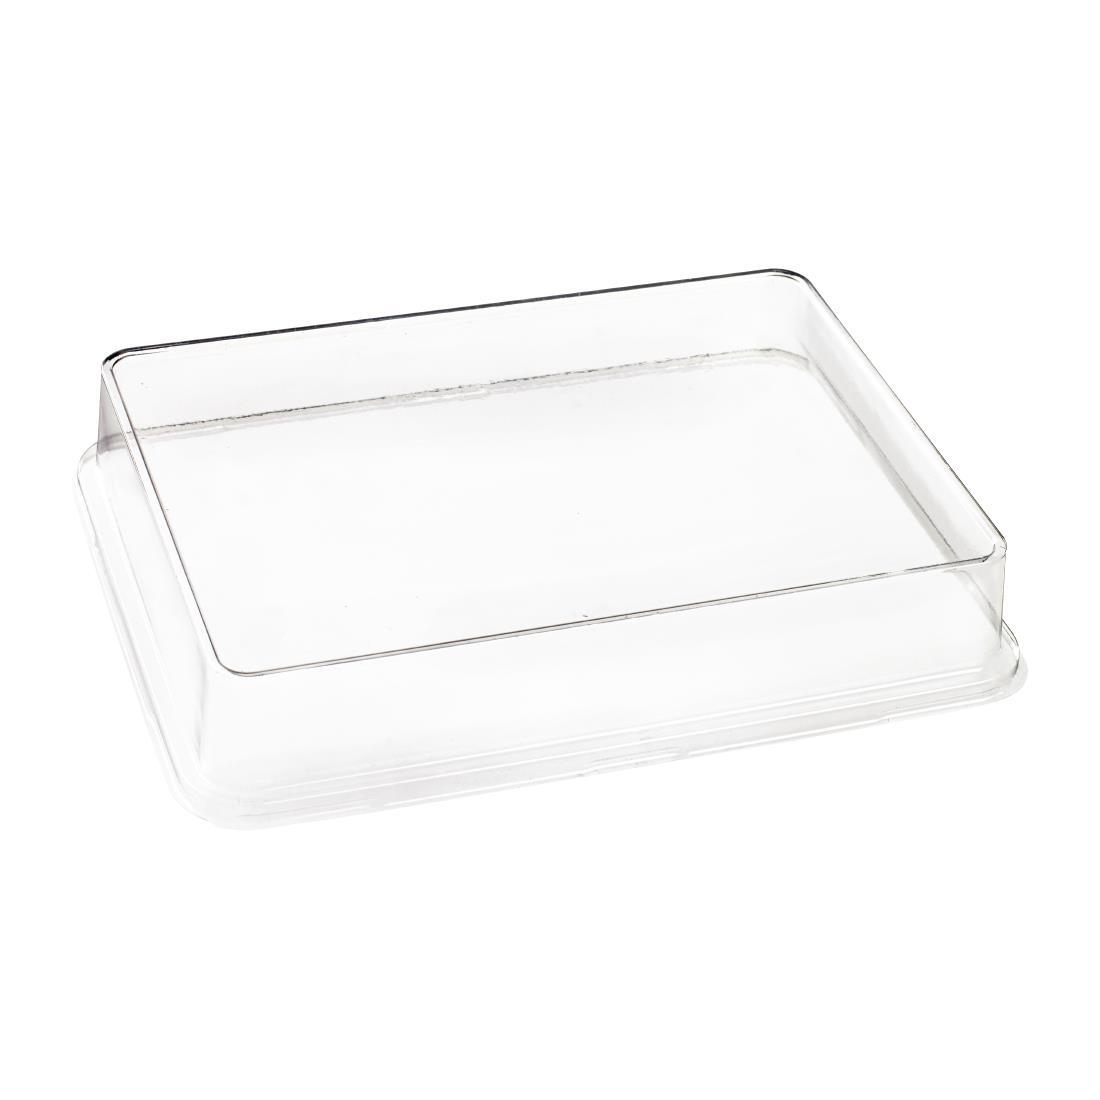 Solia RPET Lid for Bagasse Sushi Tray FC780 Clear 200x150x20mm (Pack of 50) - FS382  - 1